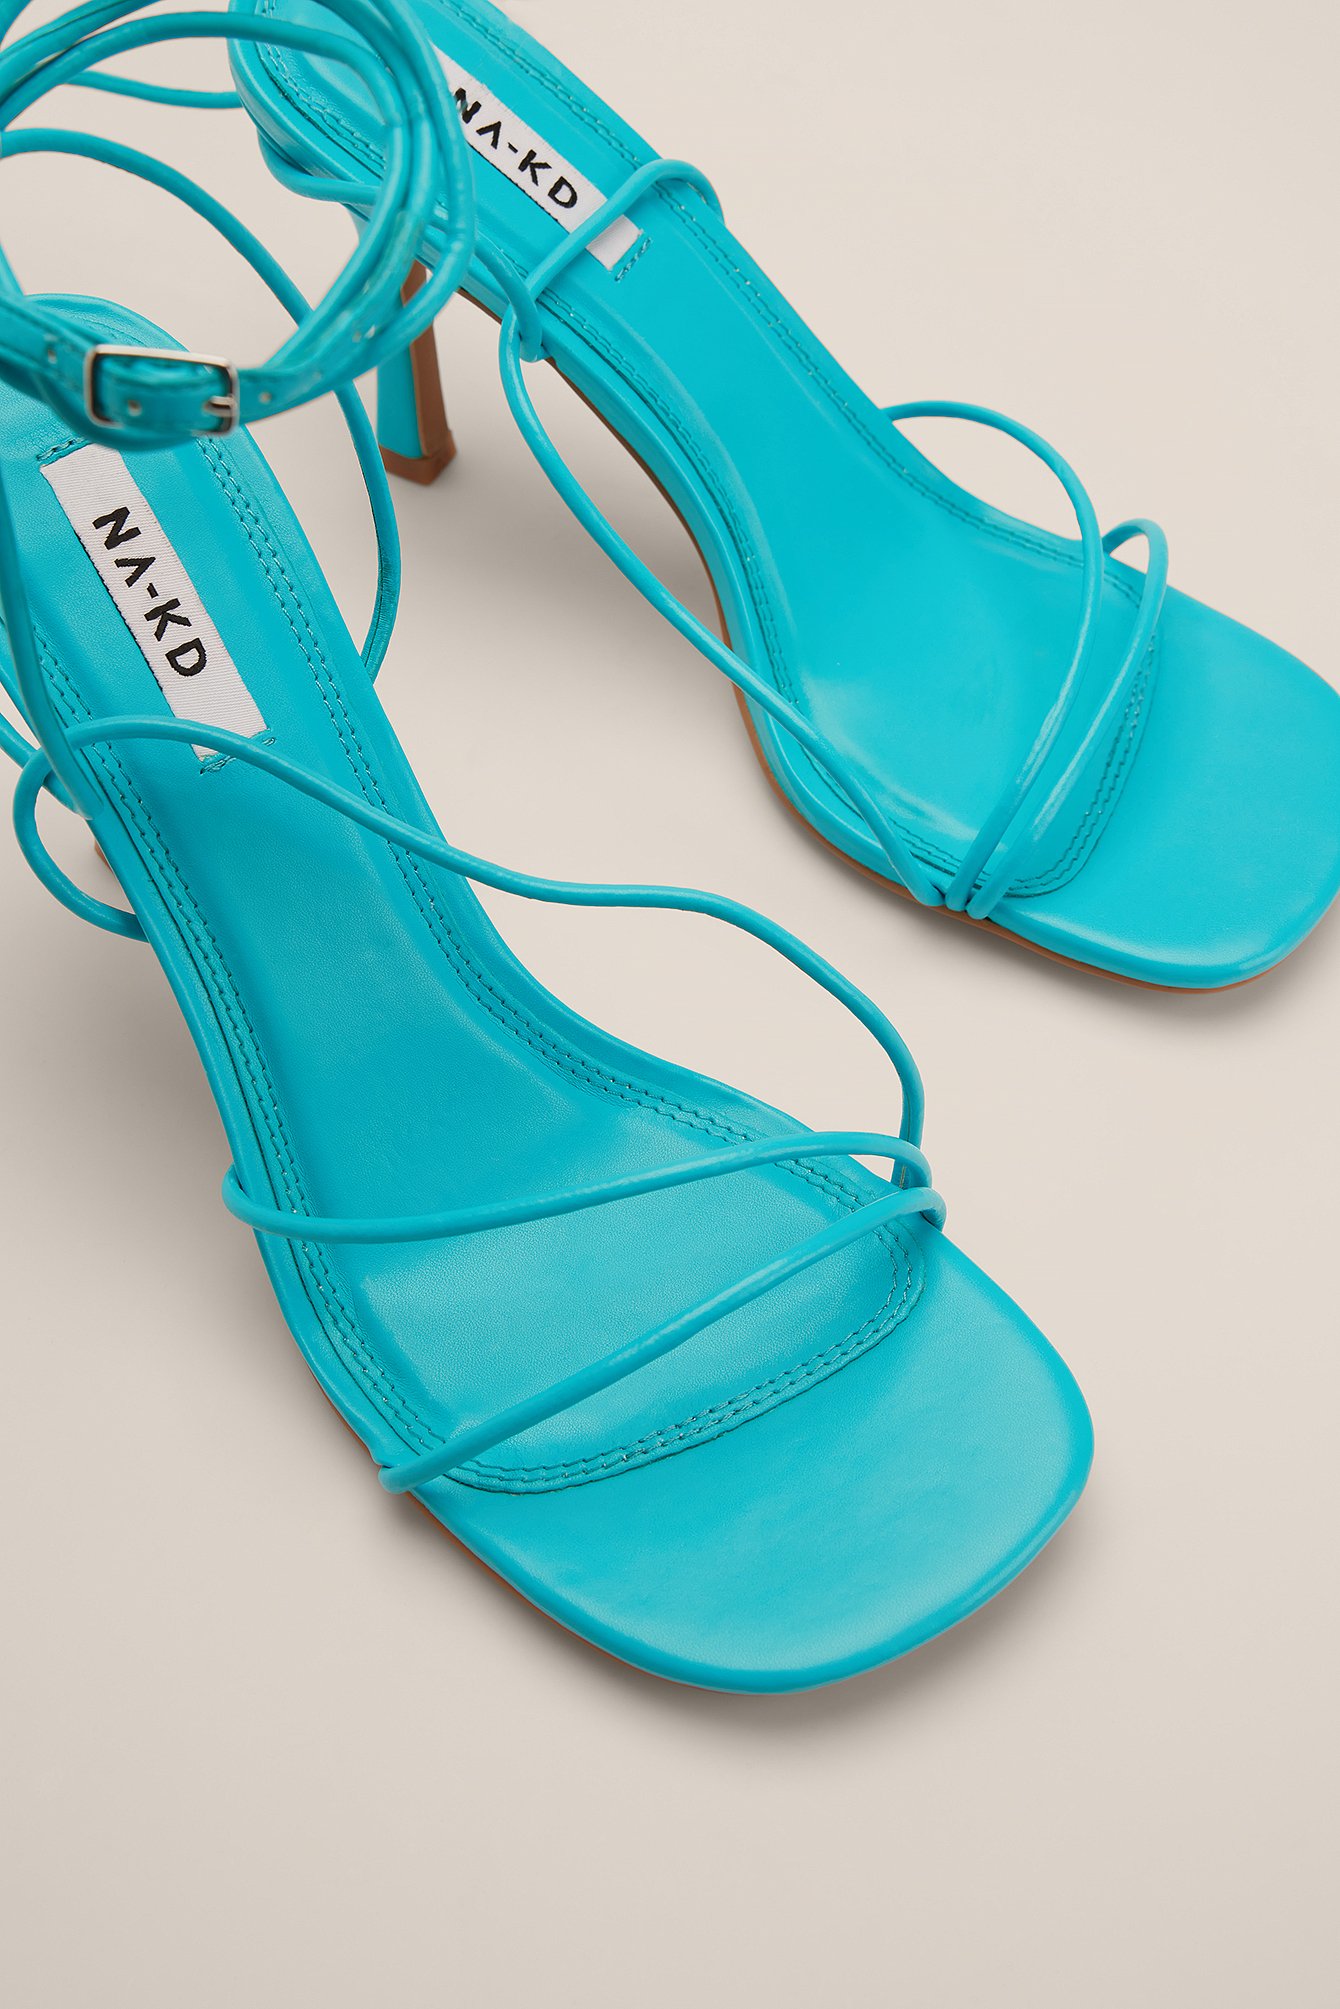 Turquoise Rounded Toe Strappy Heels